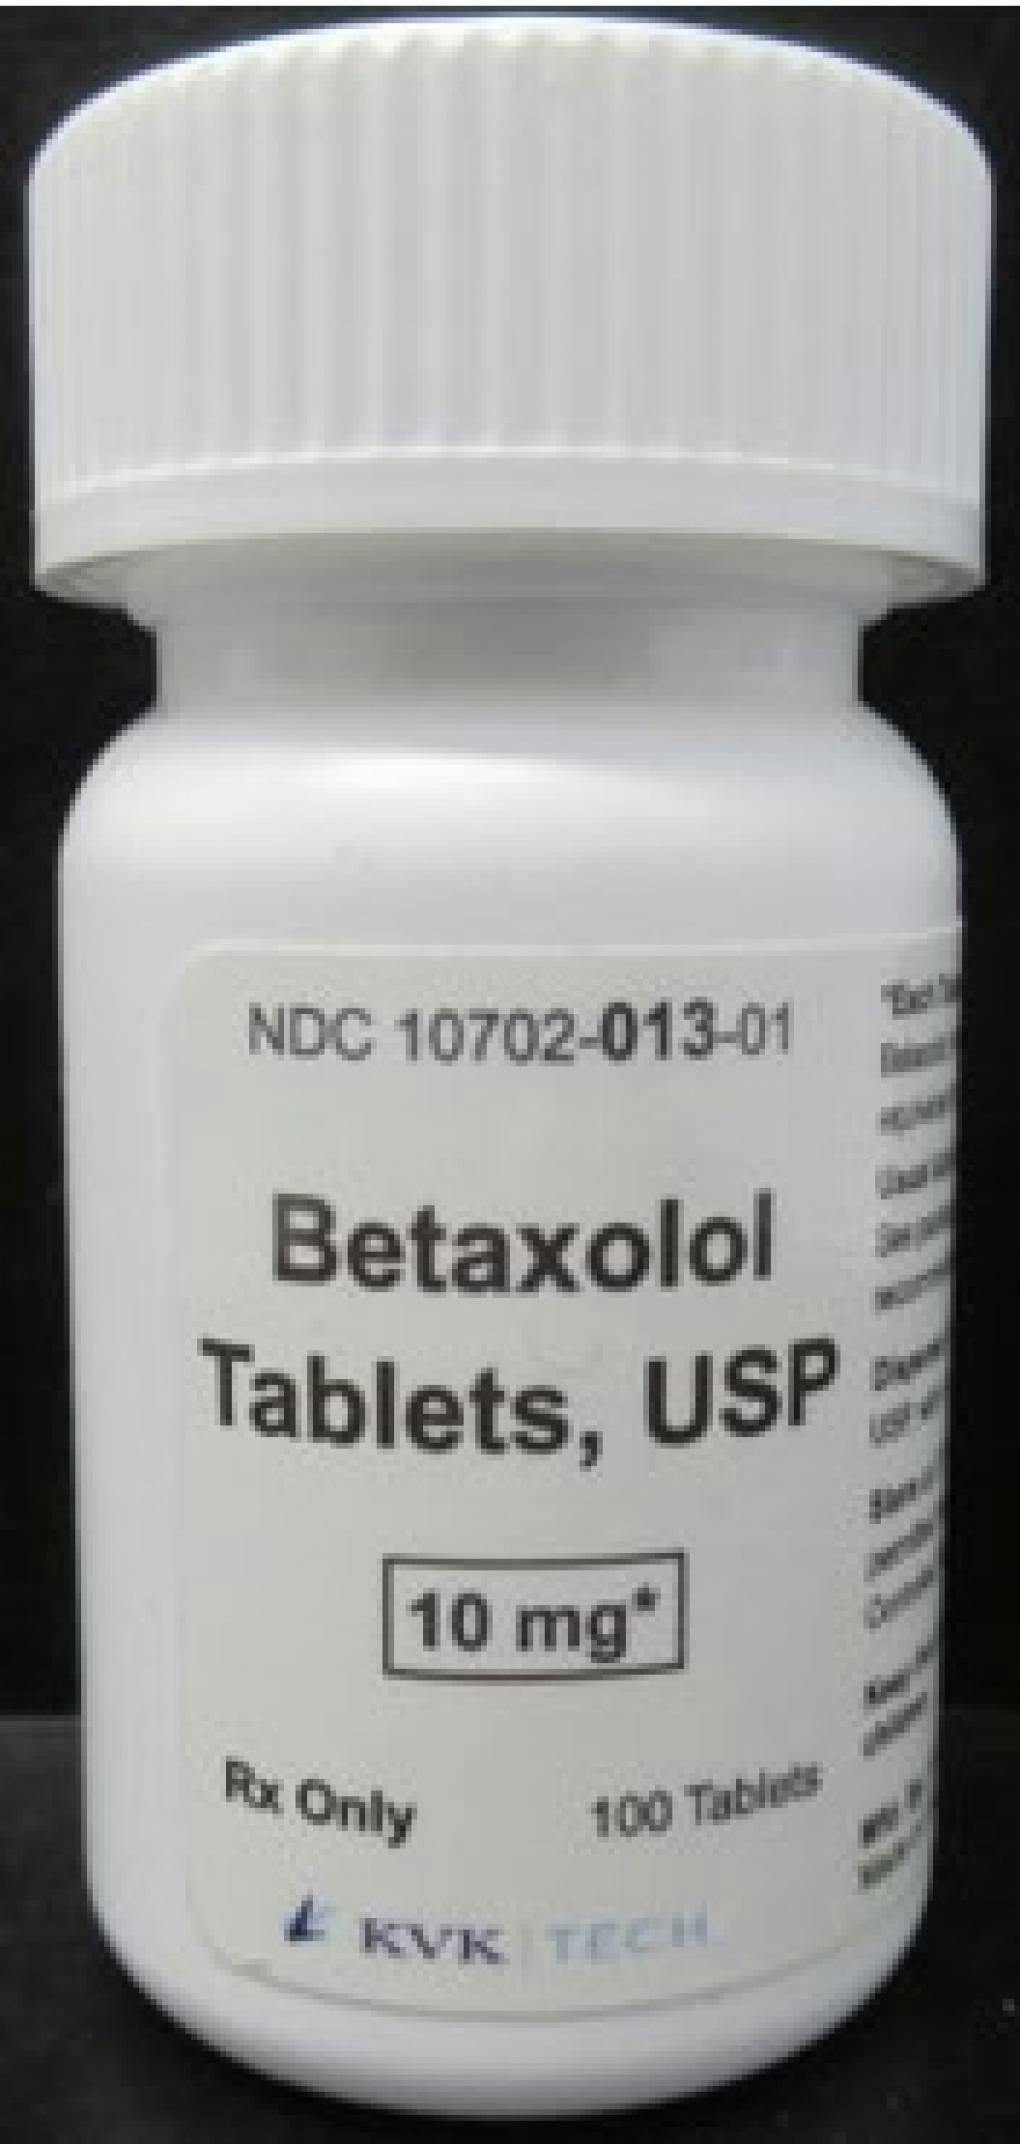 Oxycodone on Packaging Line Leads to Recall of Betaxolol